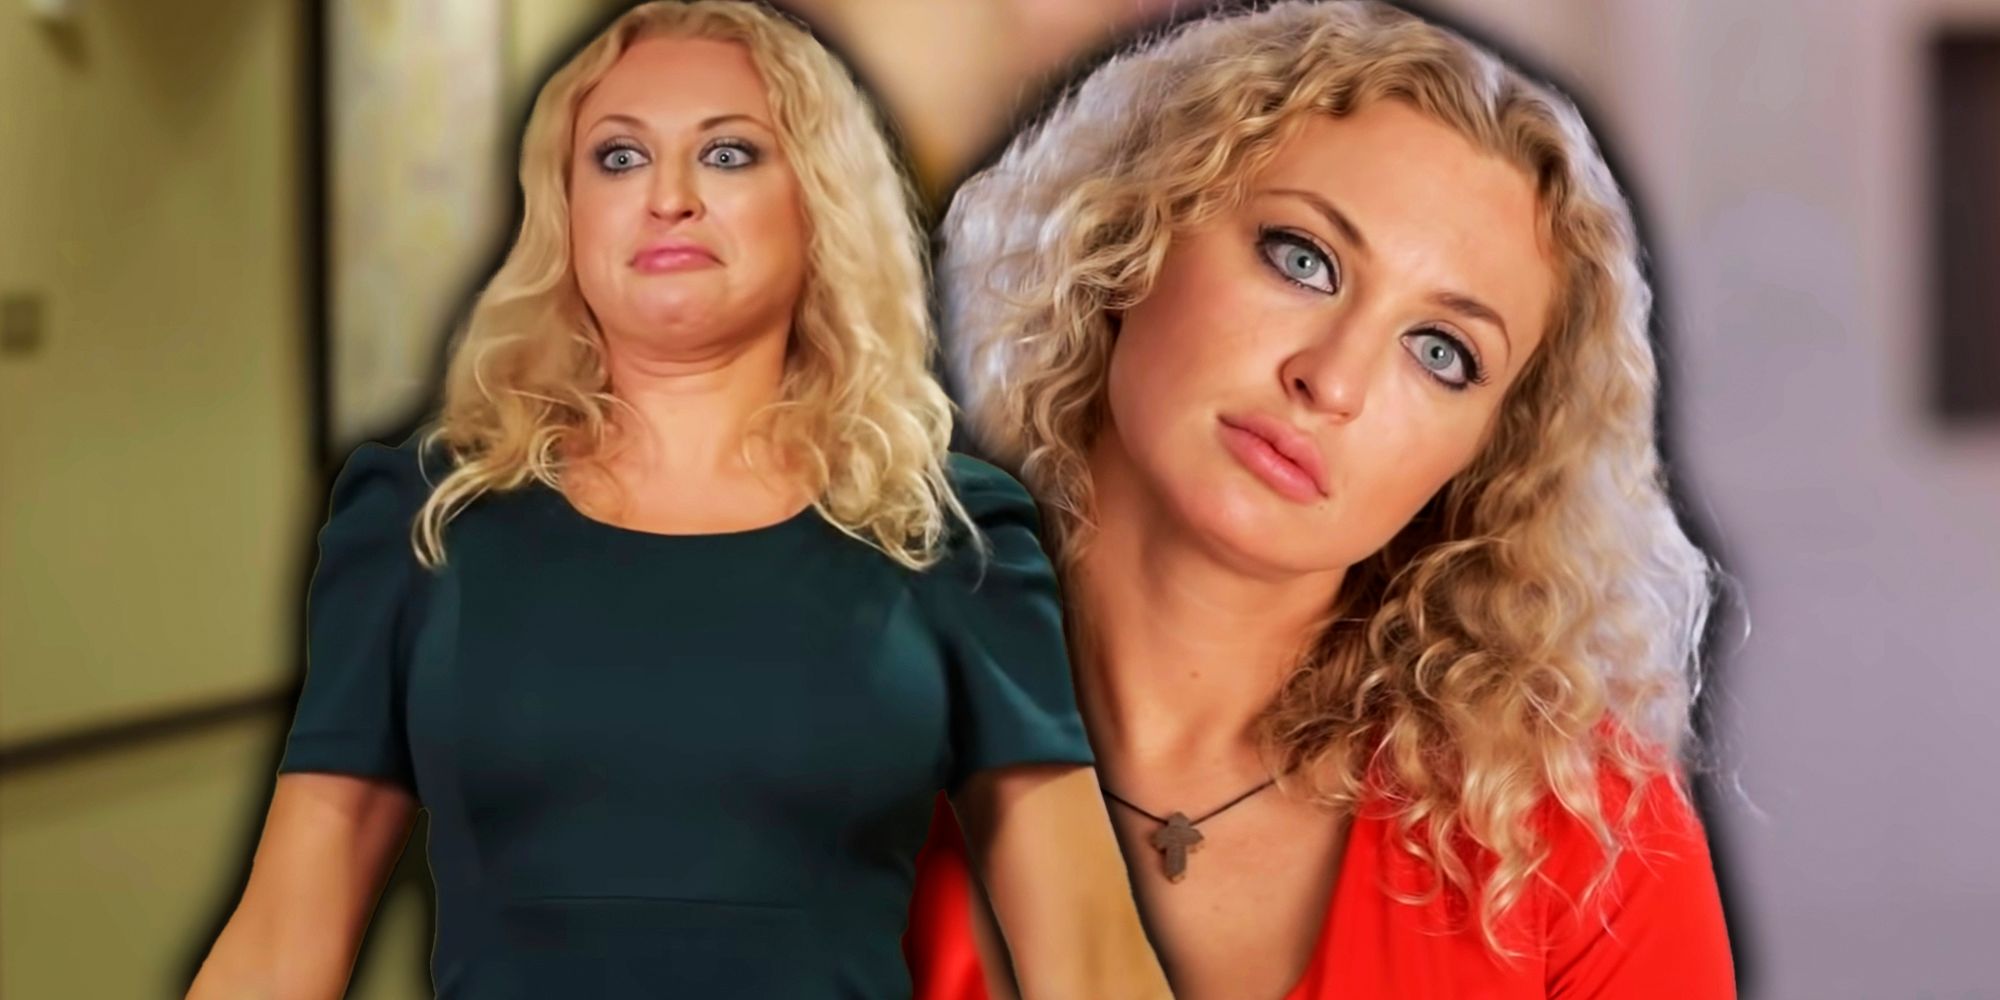 Side by side images of Natalie Mordovtseva from 90 Day Fiance